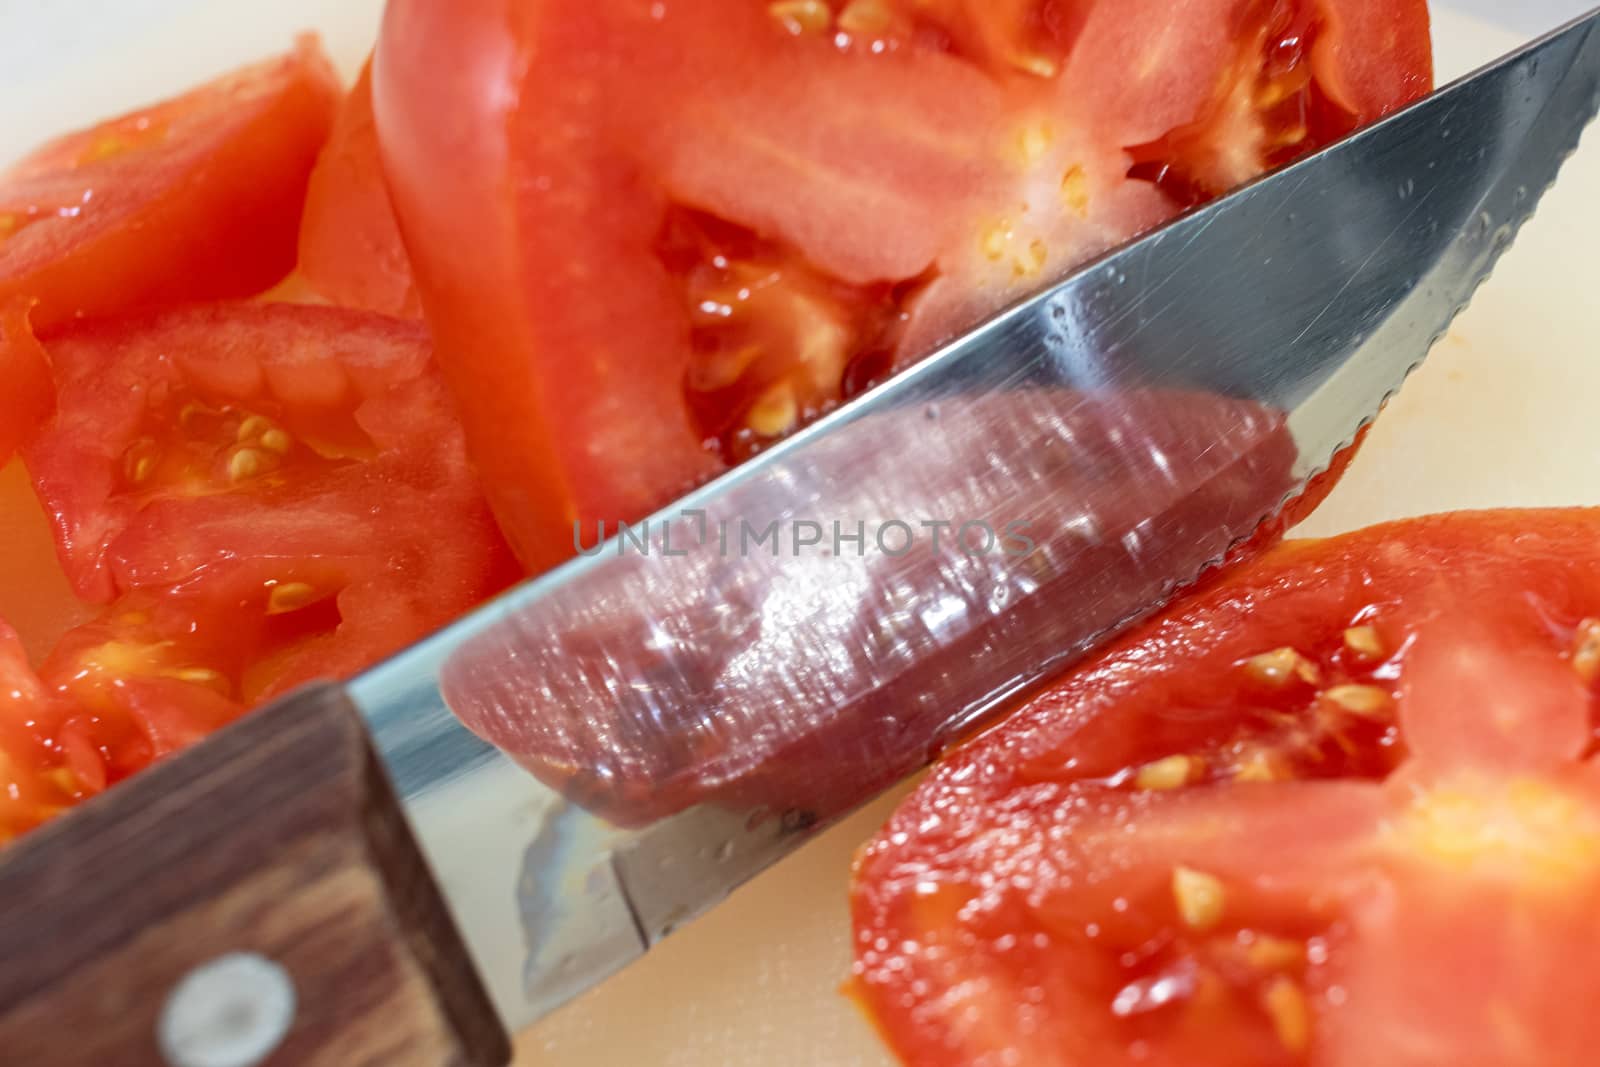 Knife Cuts Through Tomato on Cutting Board by colintemple